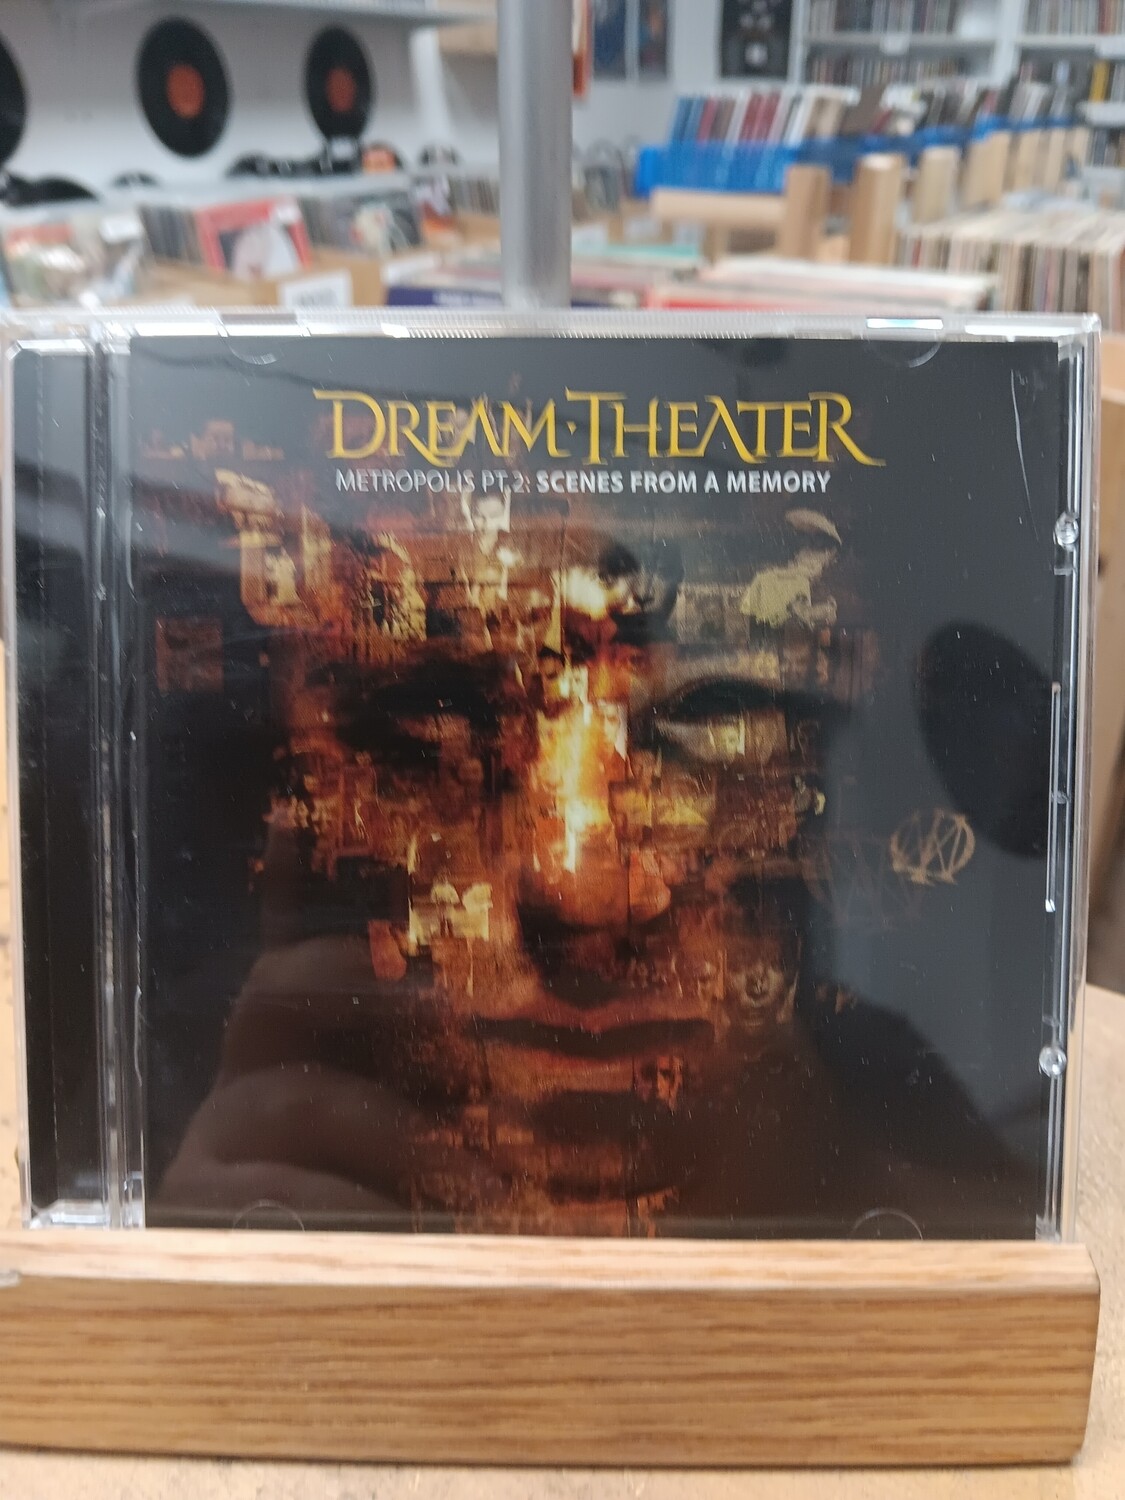 DREAM THEATER - Metropolis PT2 : Scenes from a memory (CD)